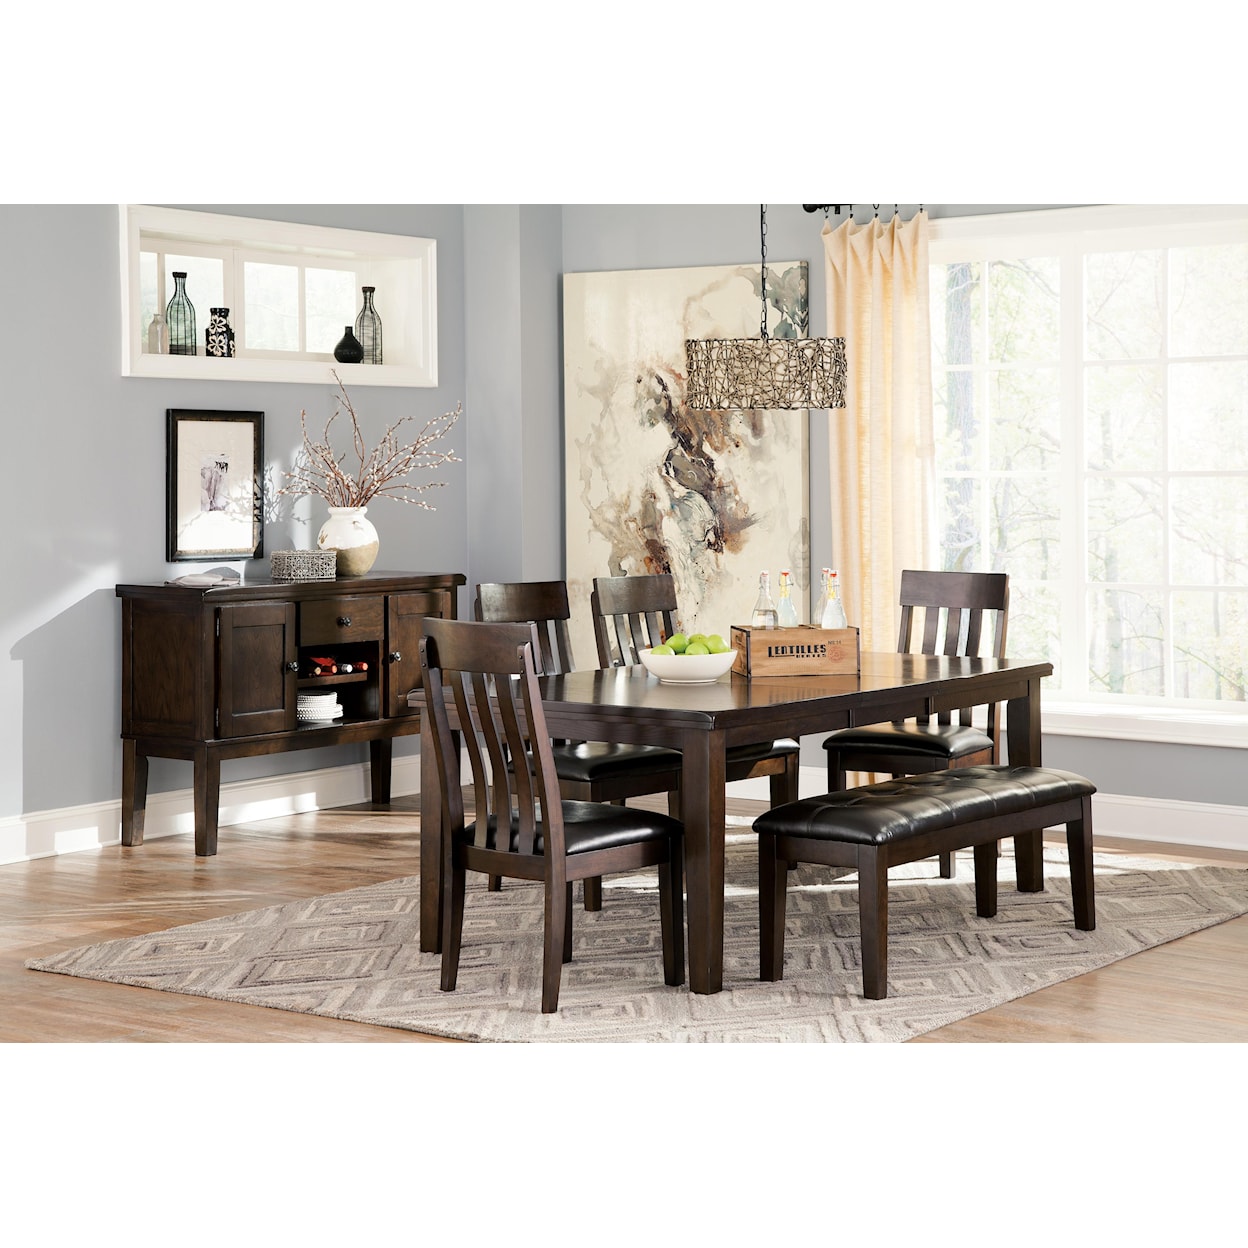 Signature Design by Ashley Haddigan Formal Dining Room Group